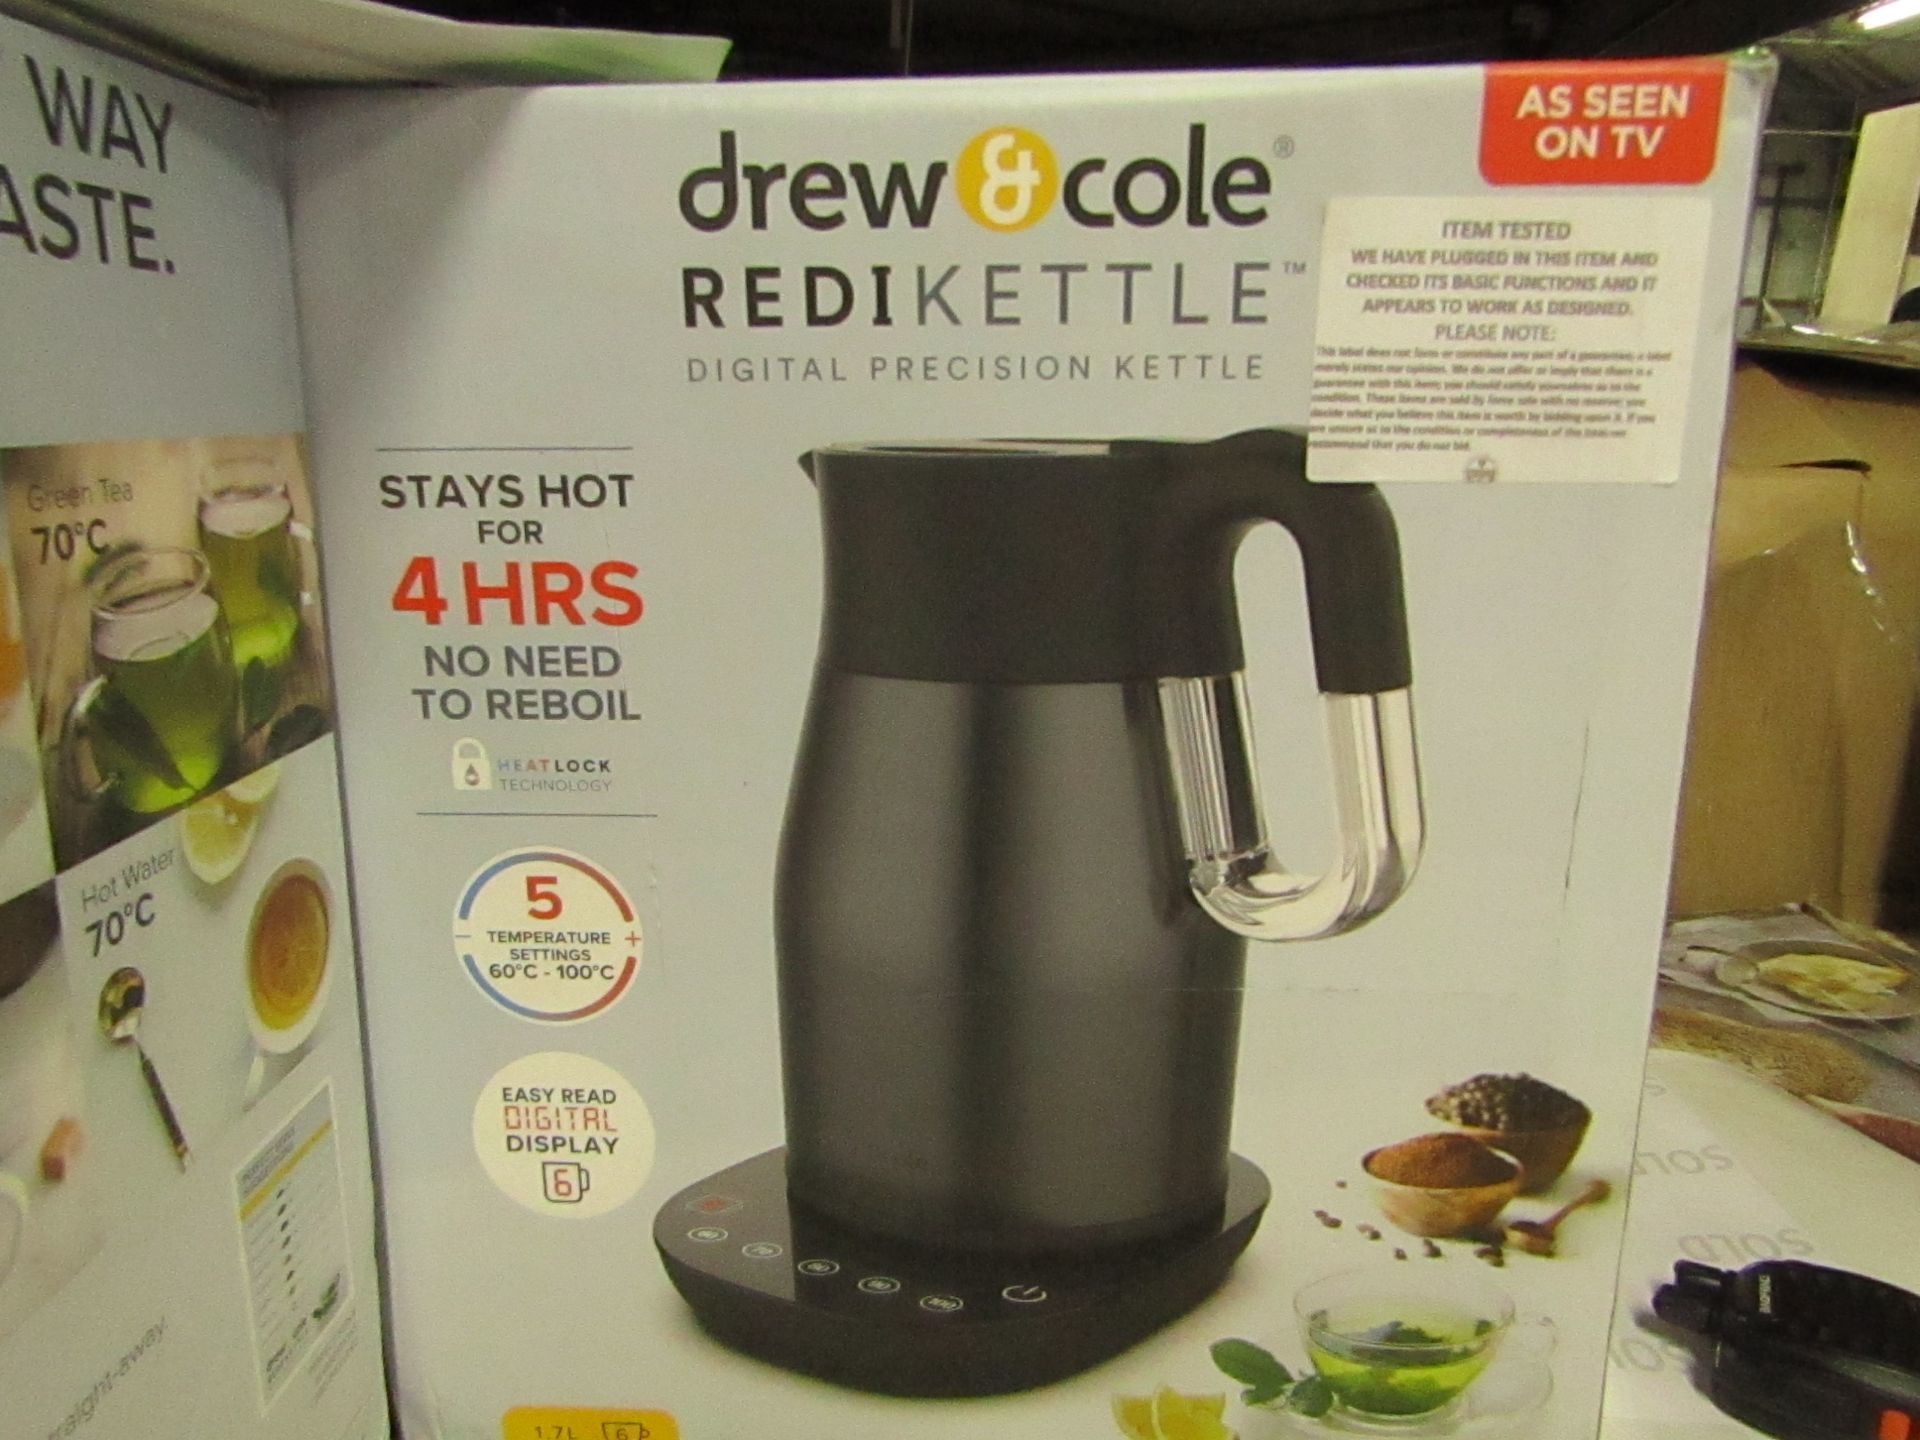 Drew and Cole Charcoal Redi Kettle 1.7L, tested working and boxed |SKU C5060541513587 |RRP œ69: